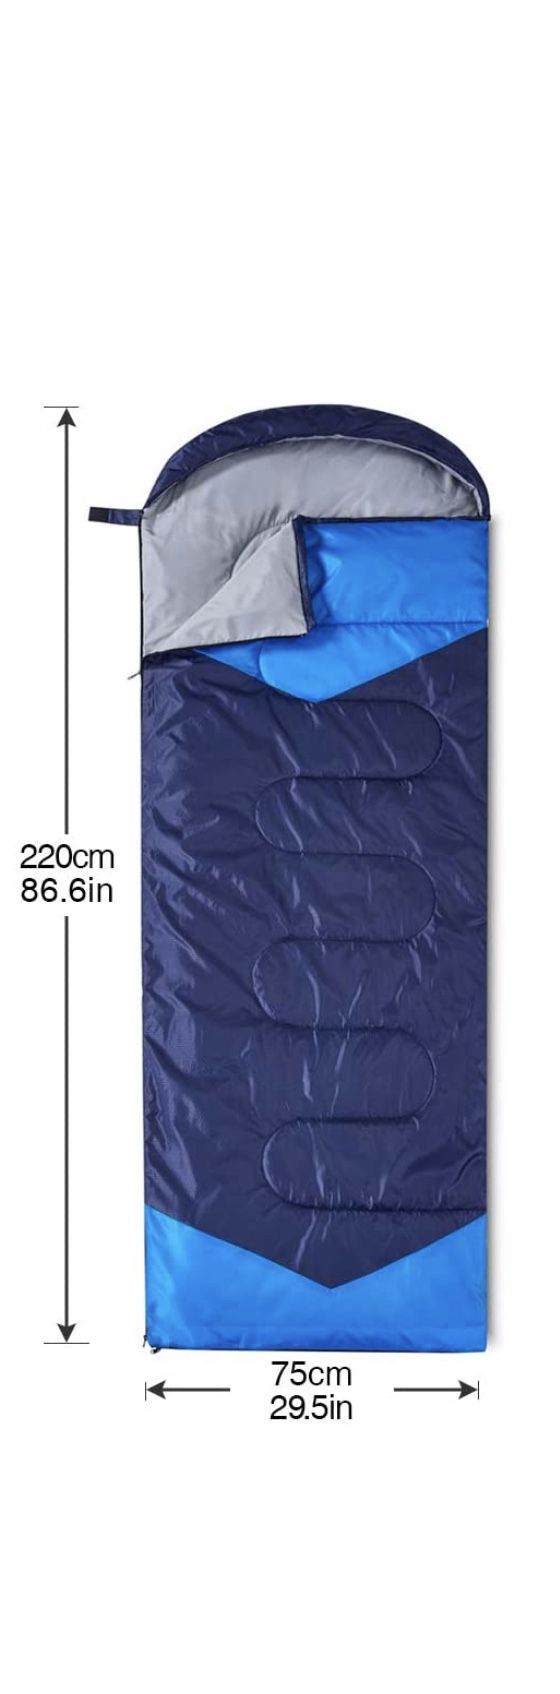 Oaskys Double Sleeping Bag for Camping Waterproof Sleeping Bags for Adults no pillow